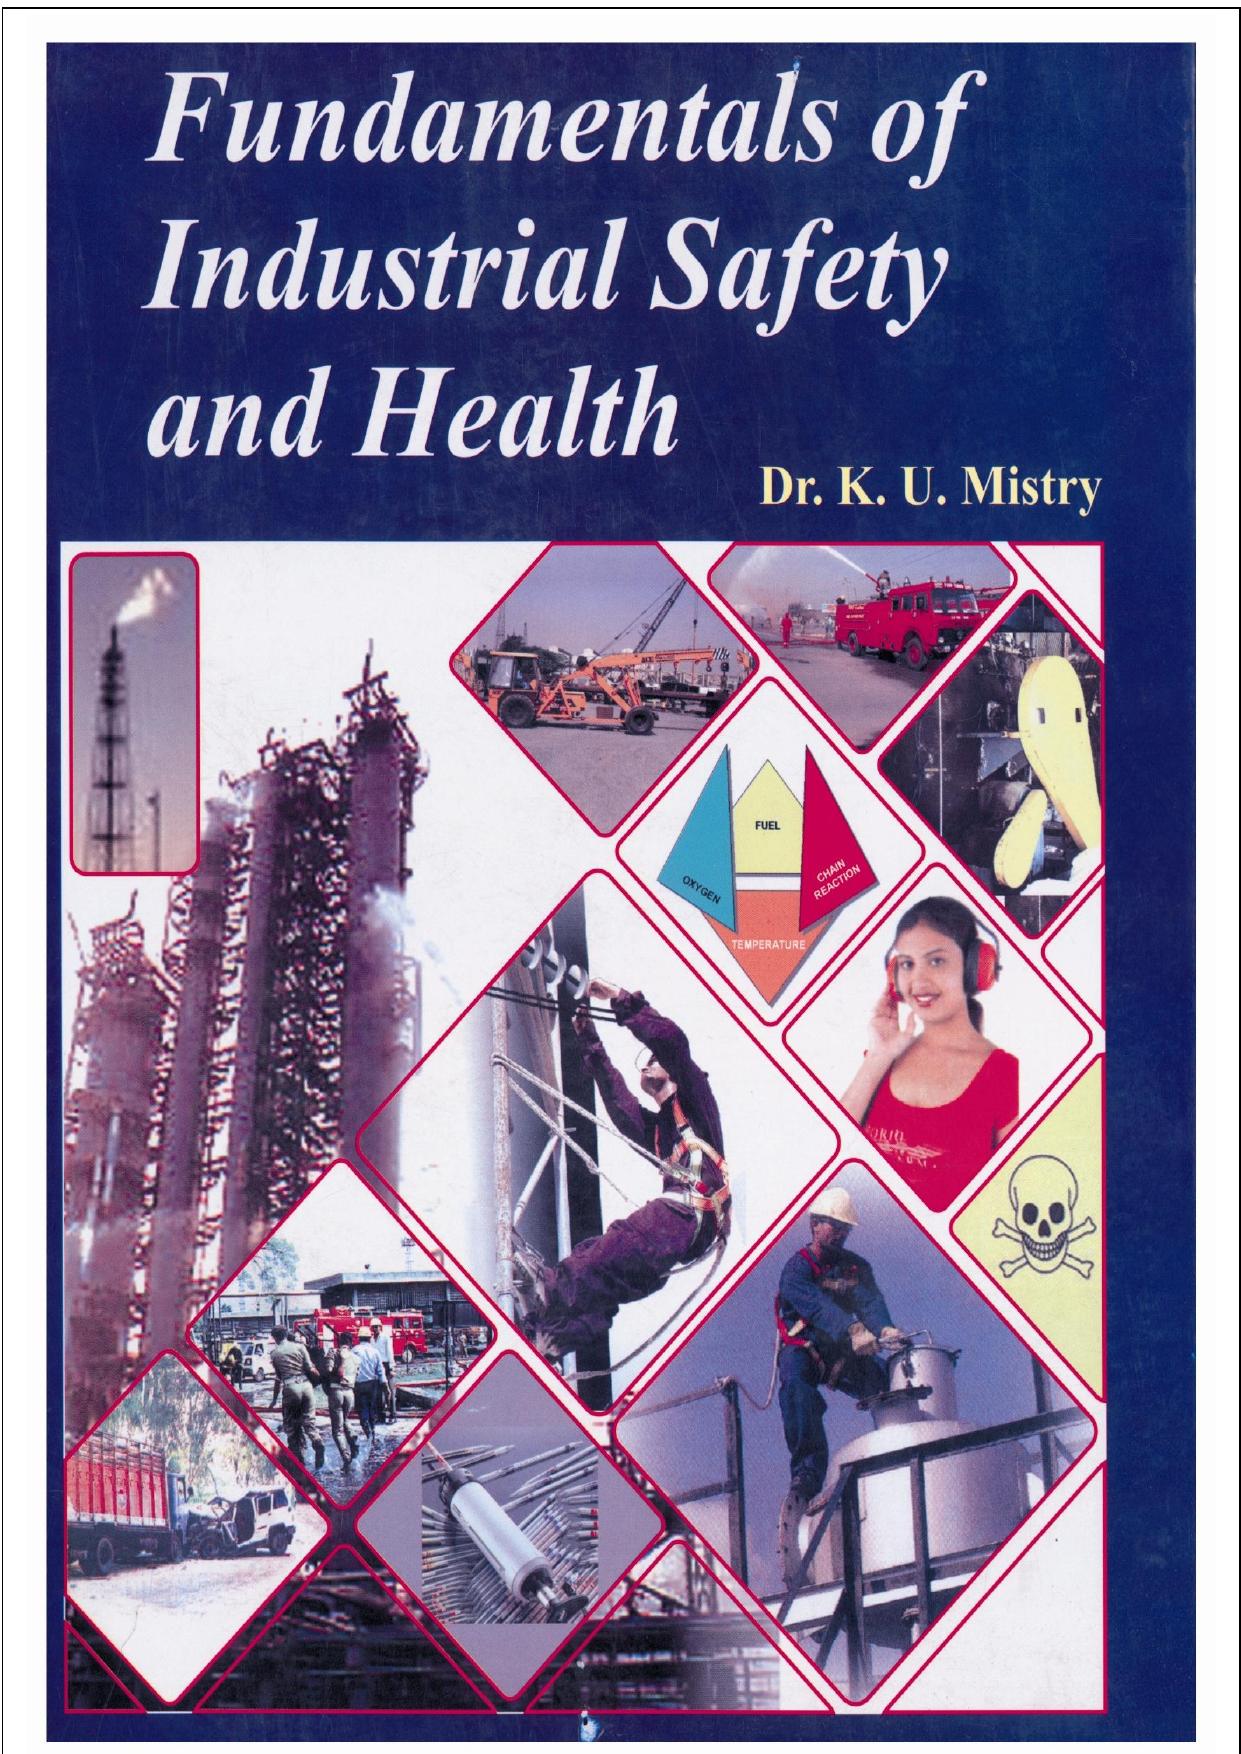 Fundamentals of industrial safety and health 2008